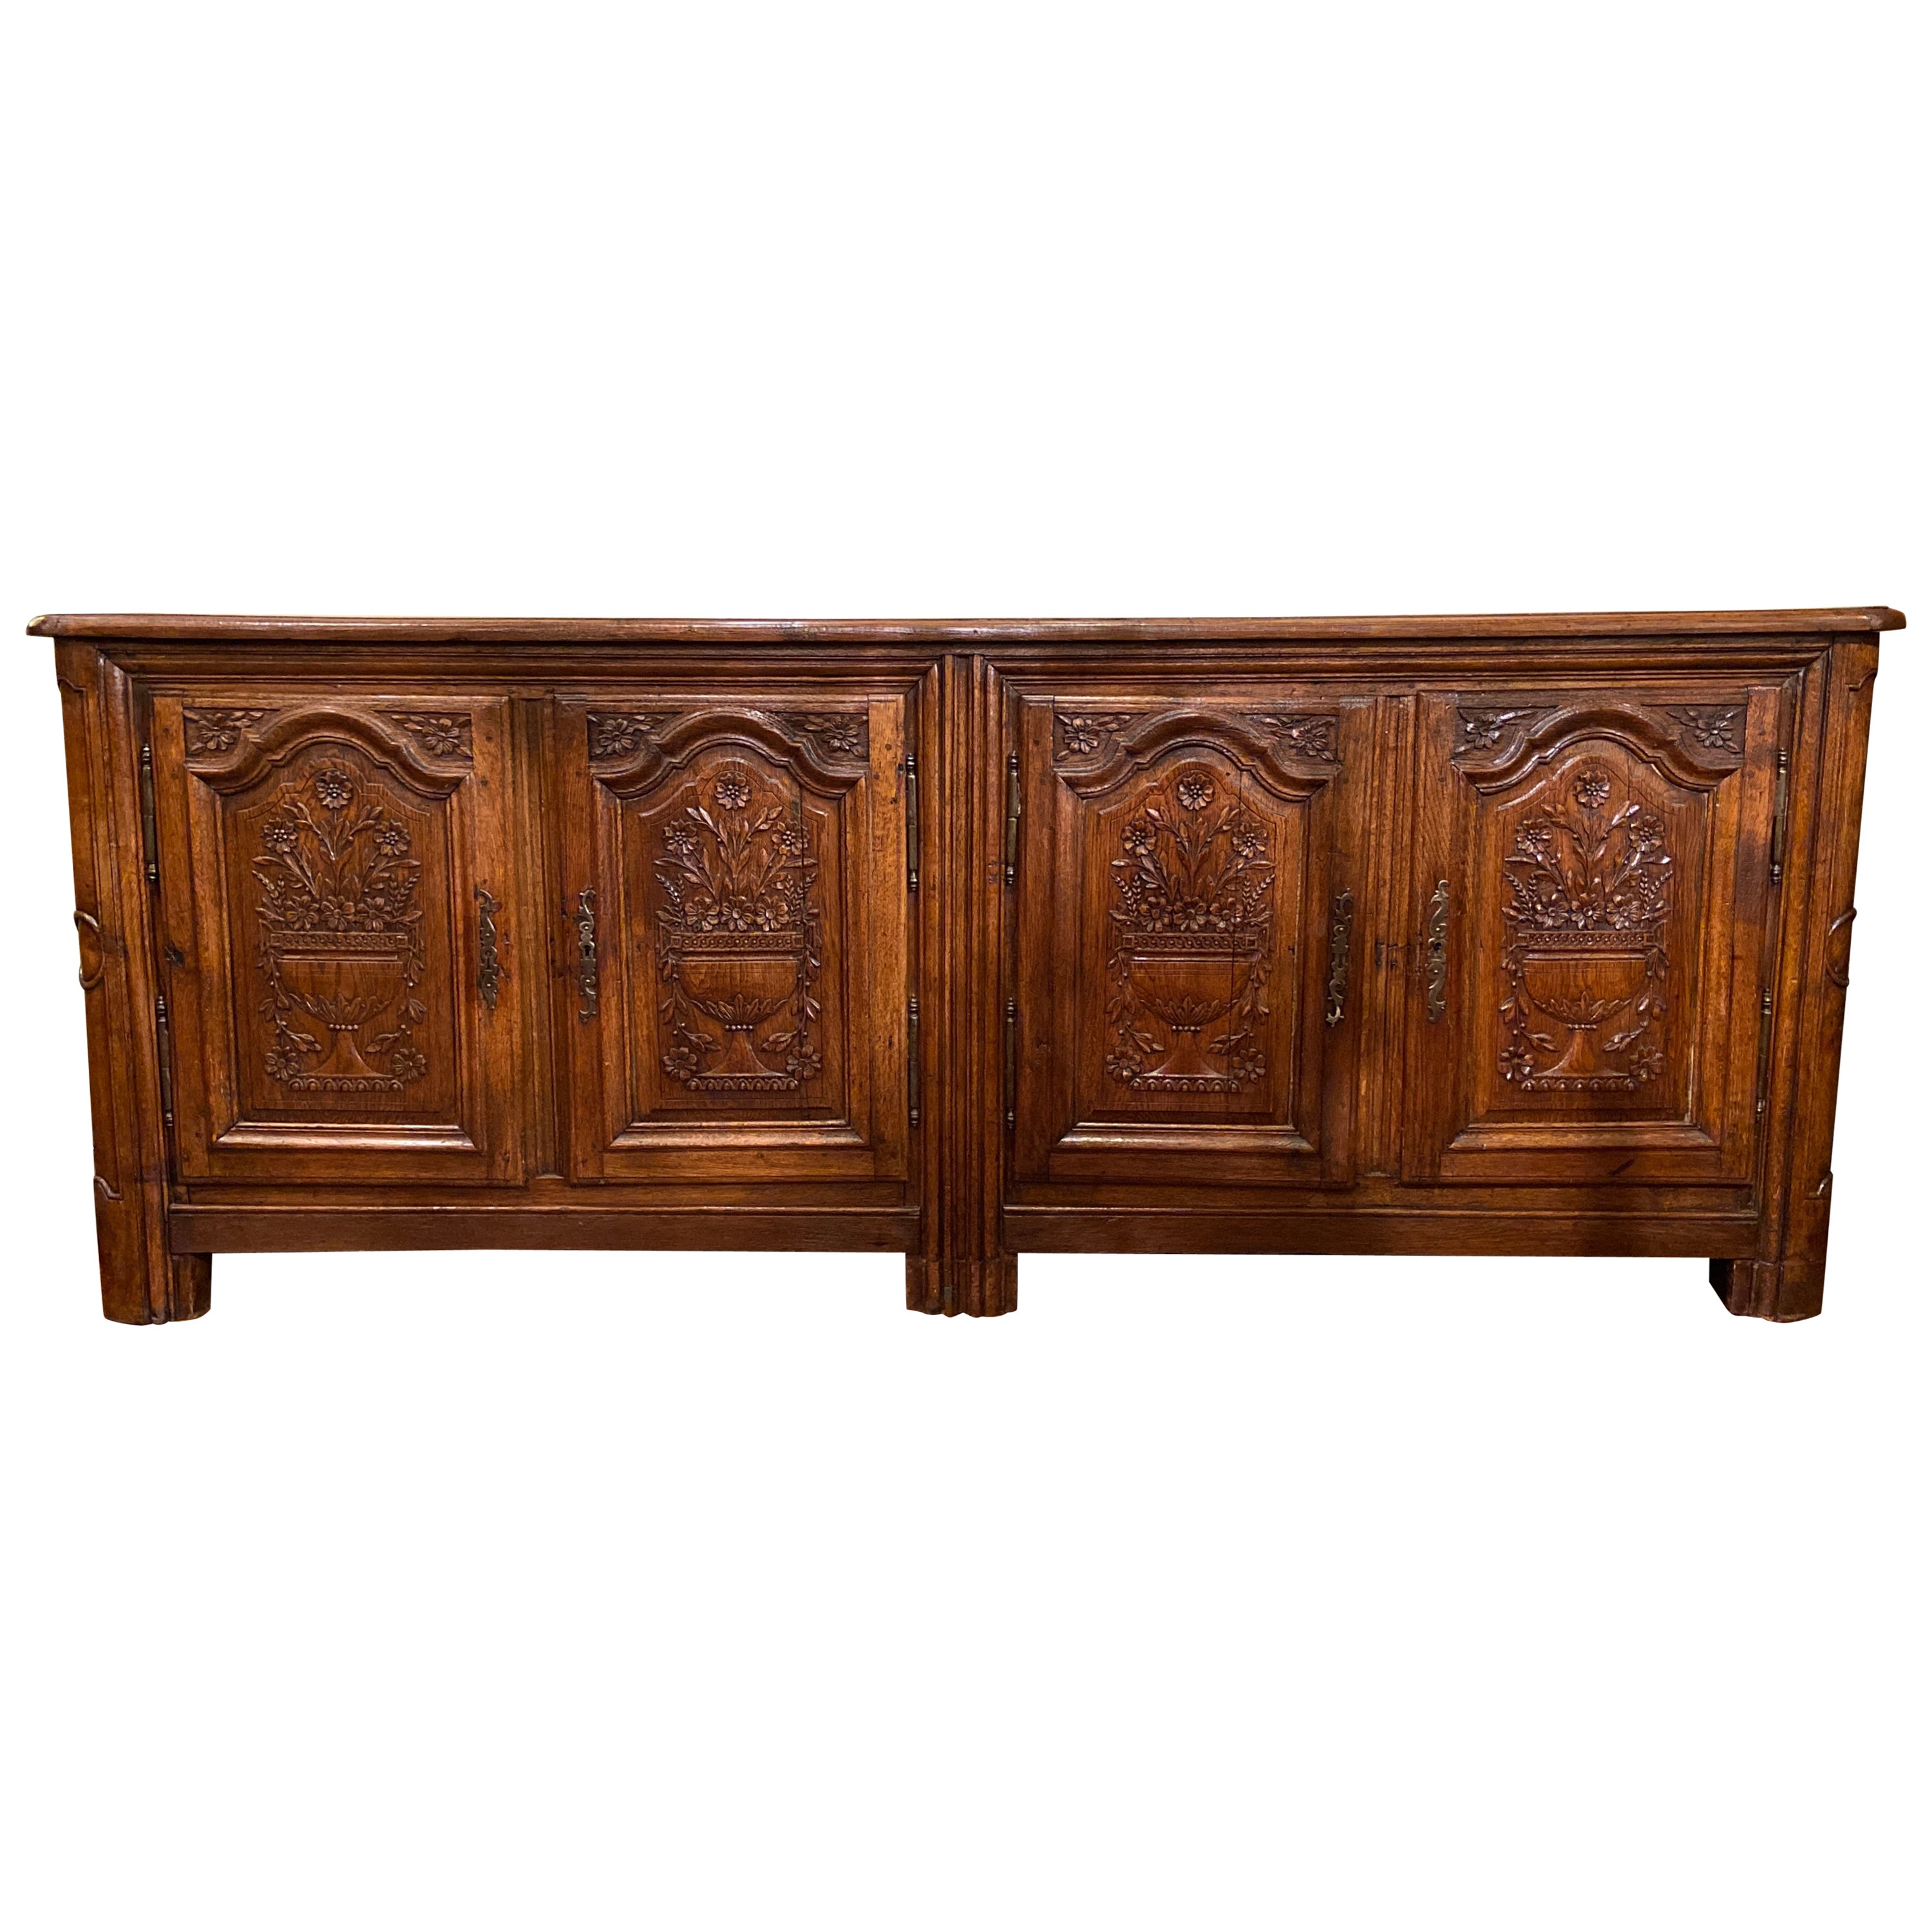 Antique French Provincial Carved Oak Sideboard, Circa 1860